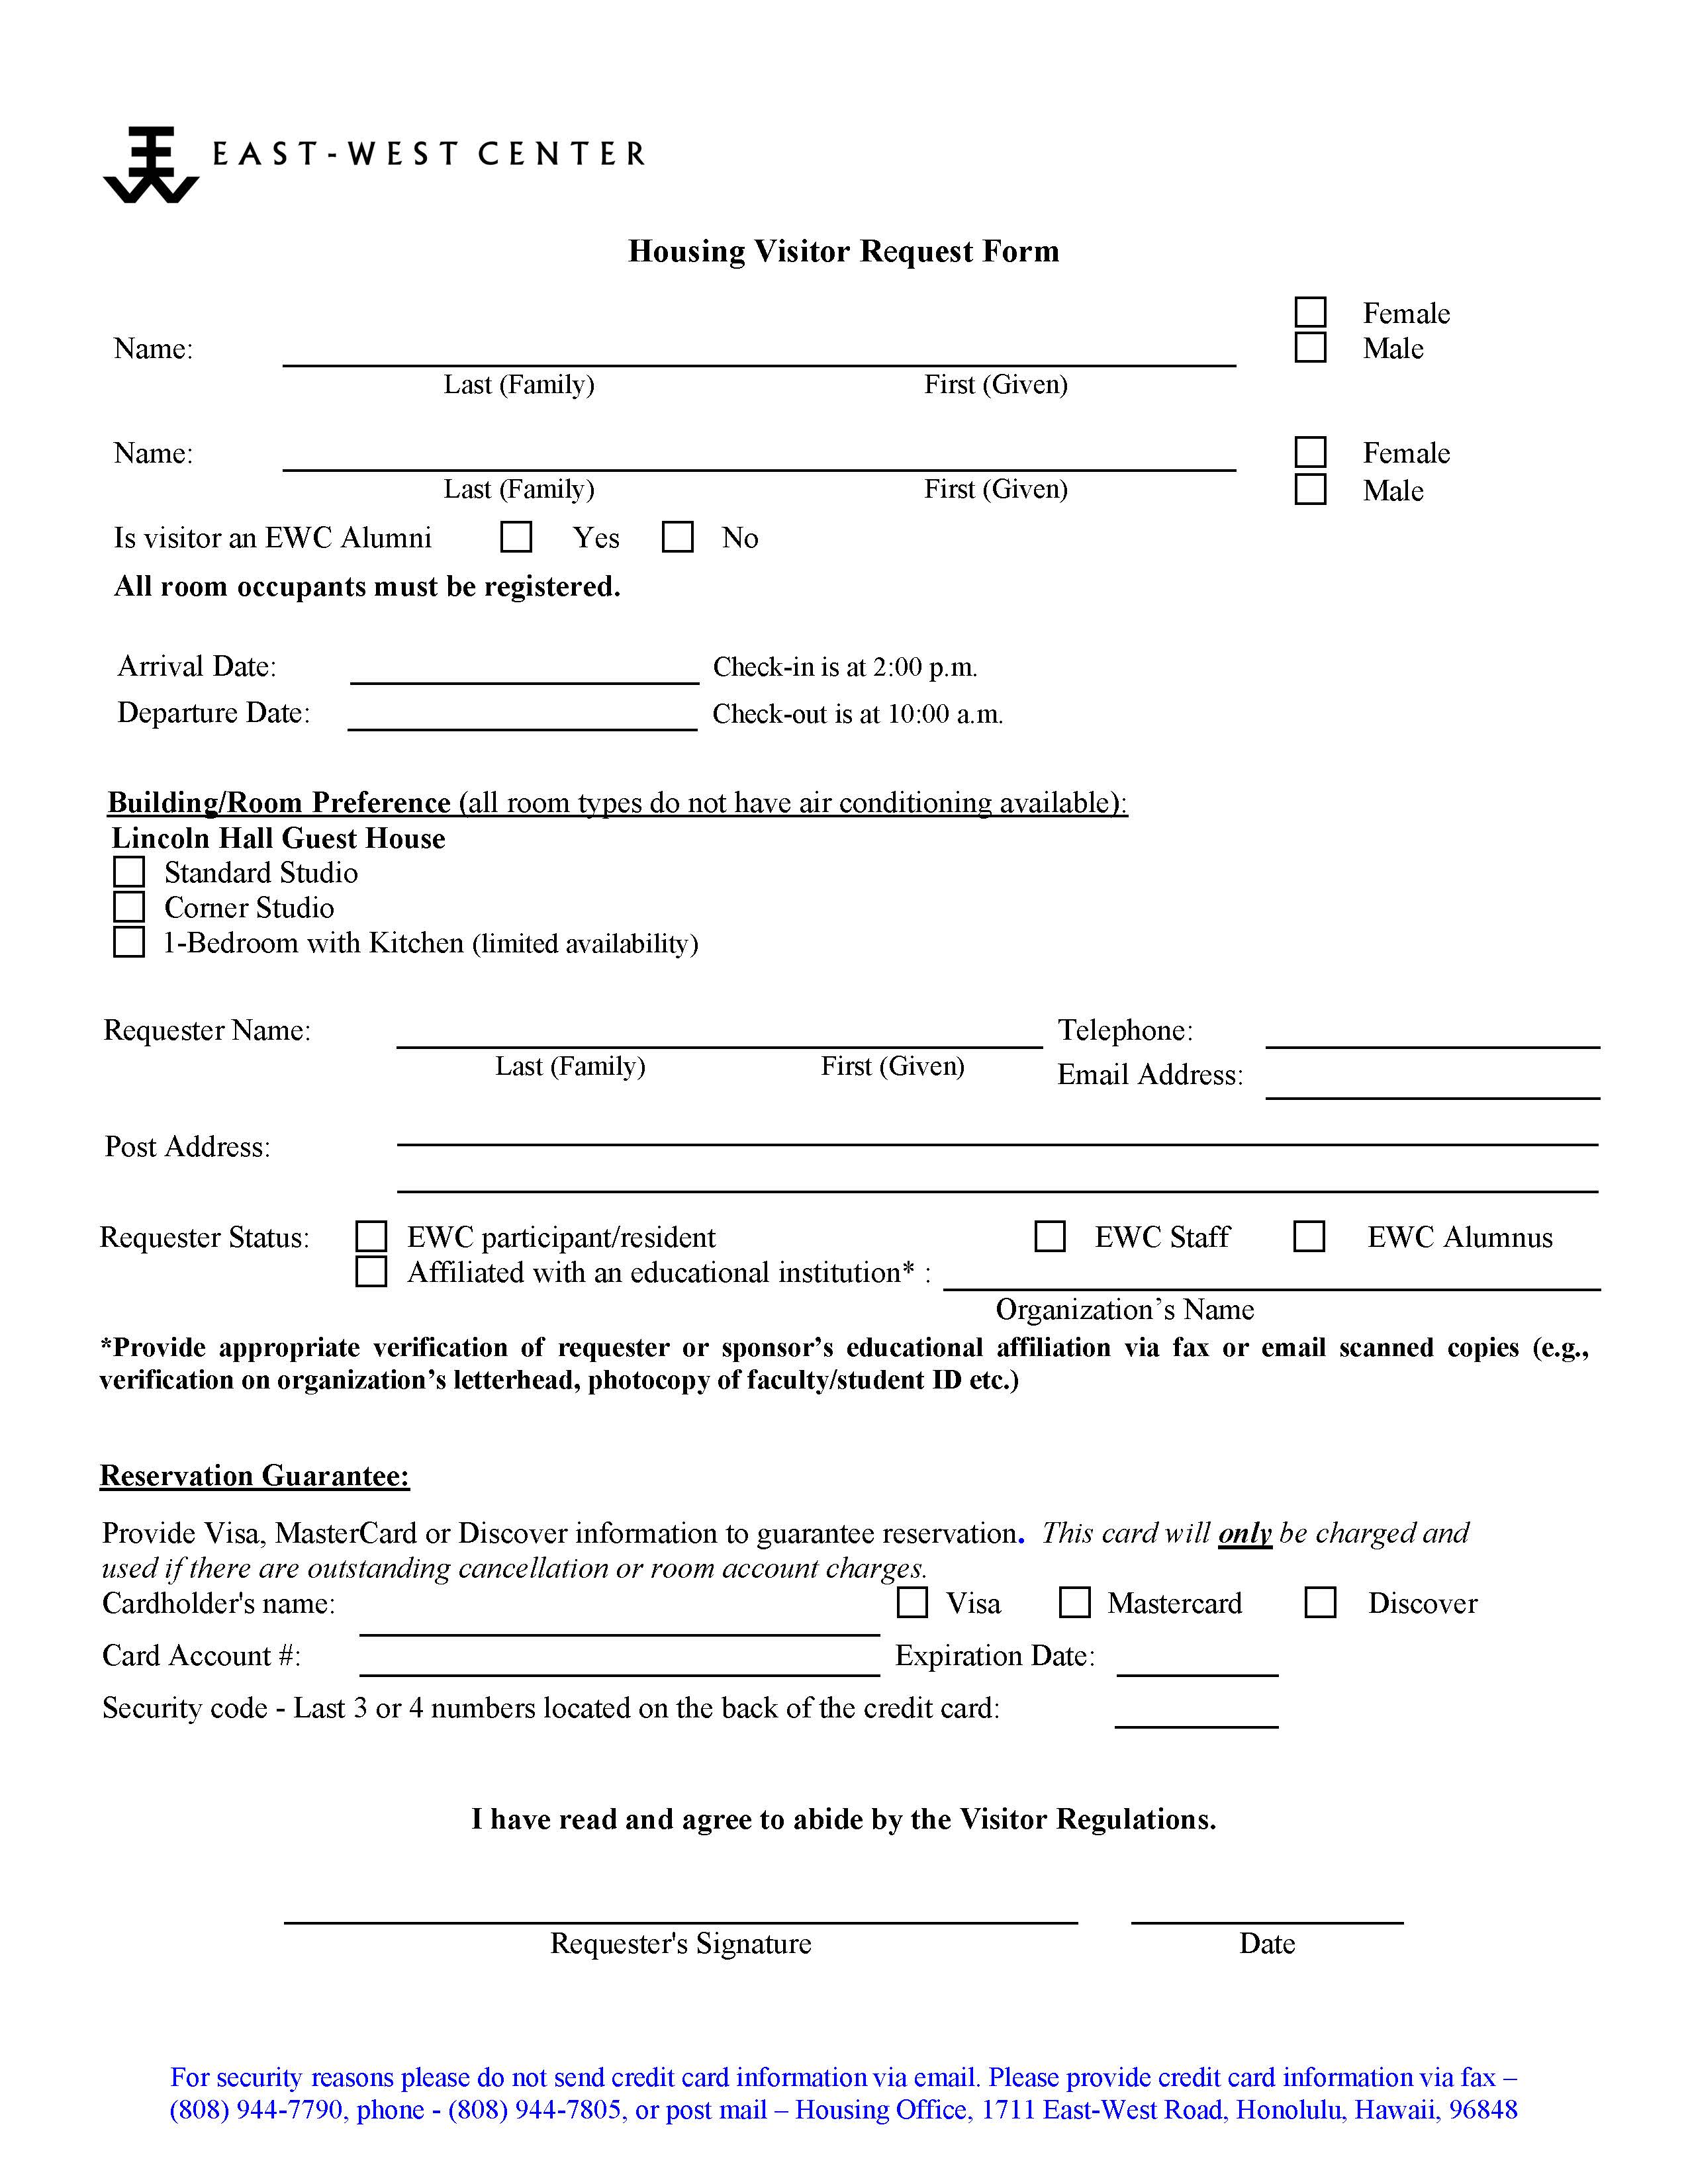 Visitor Housing Request form